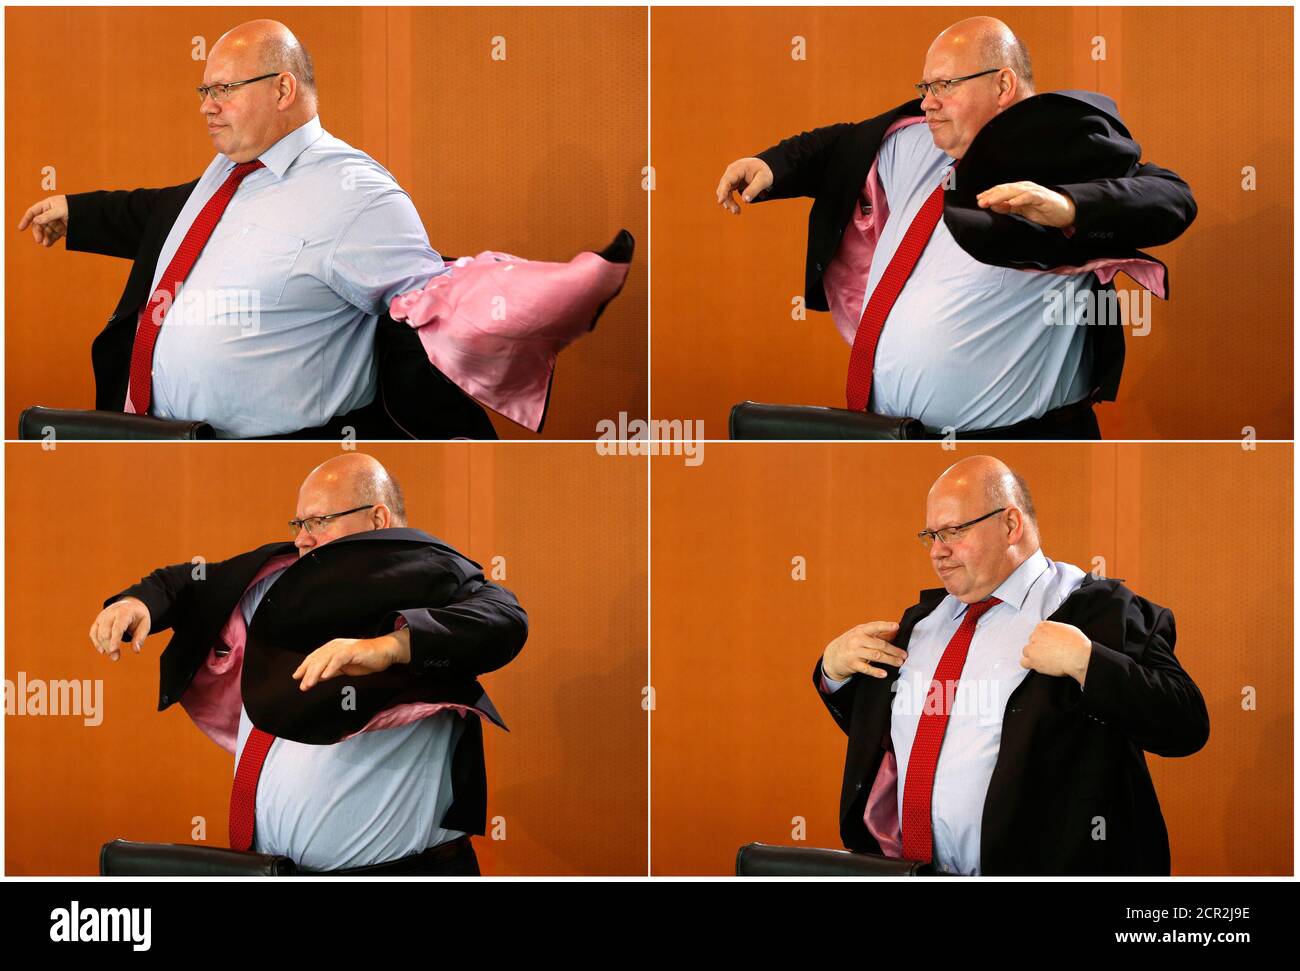 a-combination-of-four-pictures-shows-german-head-of-the-federal-chancellery-peter-altmaier-putting-on-his-jacket-during-a-cabinet-meeting-at-the-chancellery-in-berlin-germany-may-18-2016-reutersfabrizio-bensch-2CR2J9E.jpg